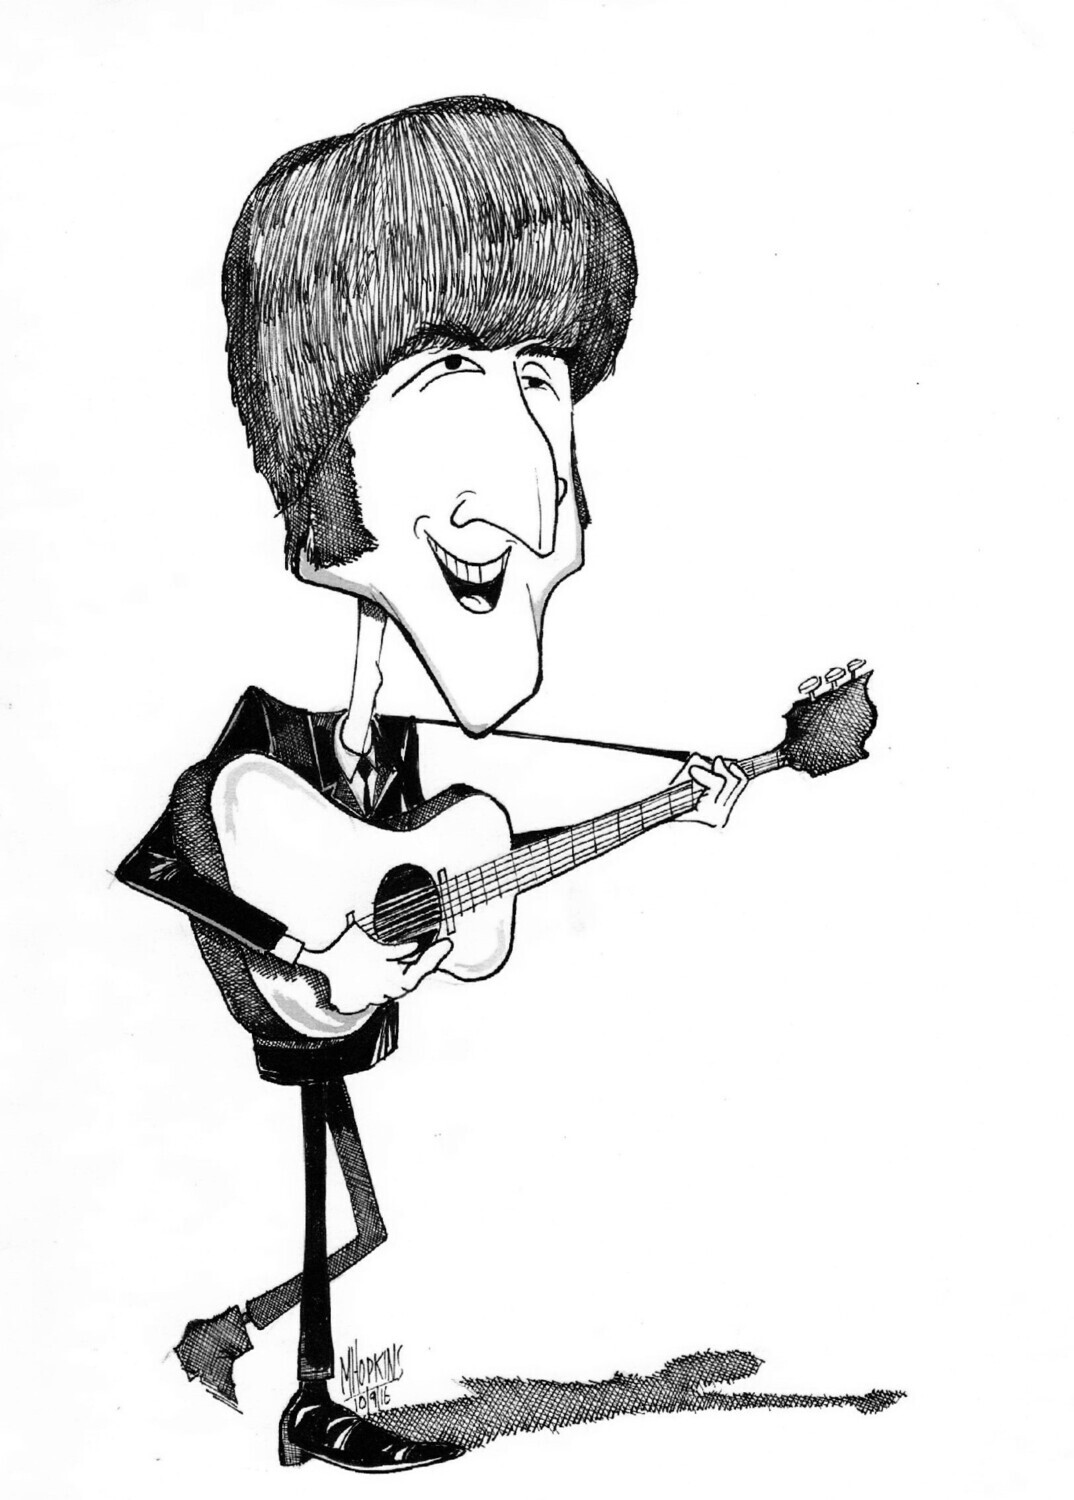 John Lennon - Limited Edition Signed Giclée Prints from $50 to $75